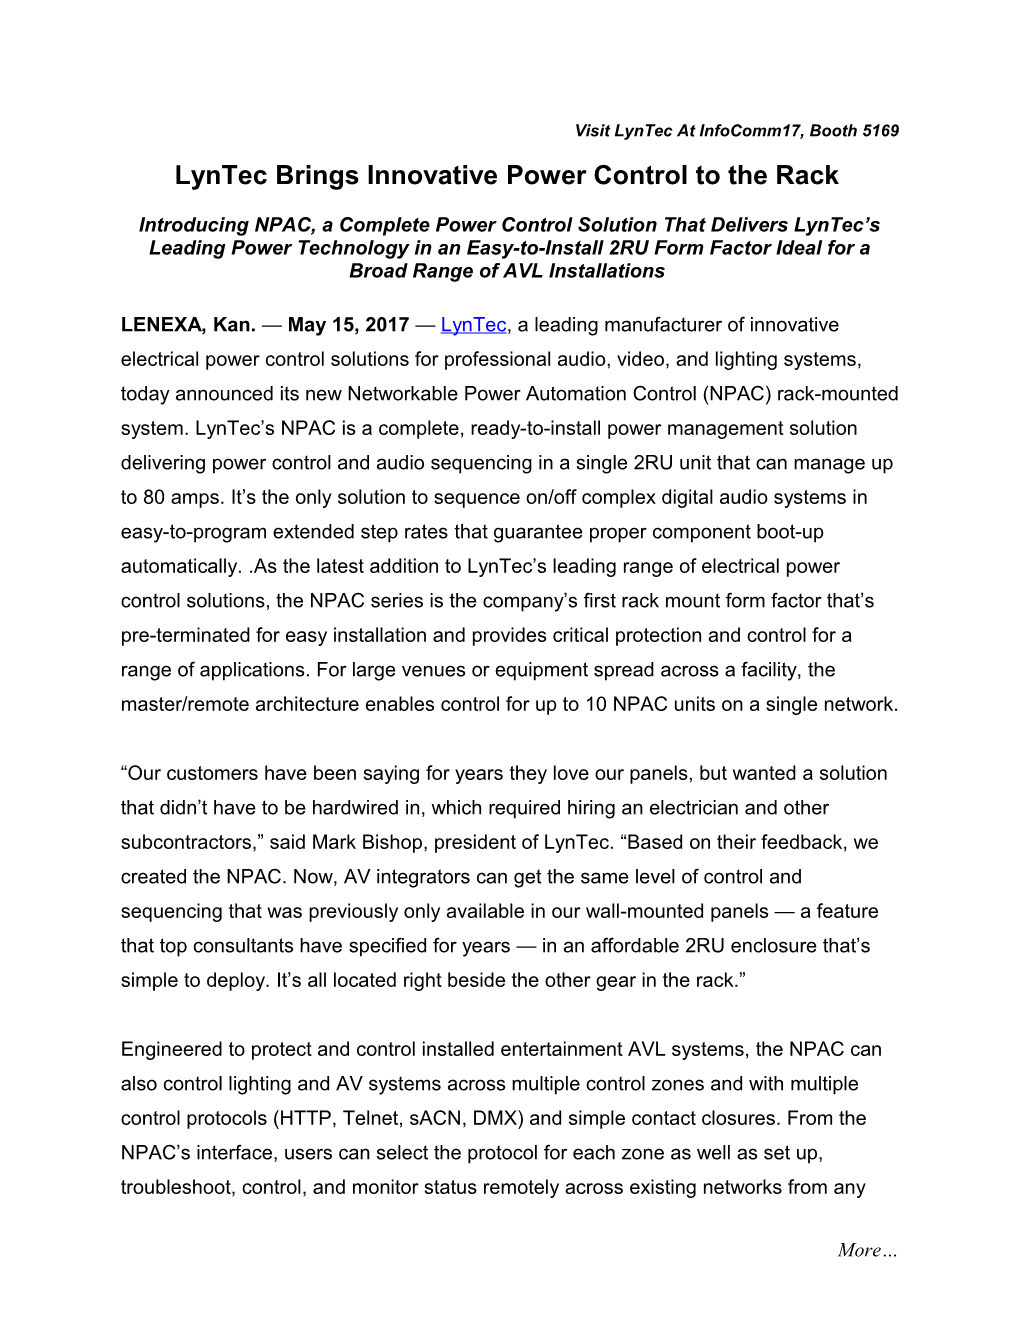 Lyntec Brings Innovative Power Control to the Rack